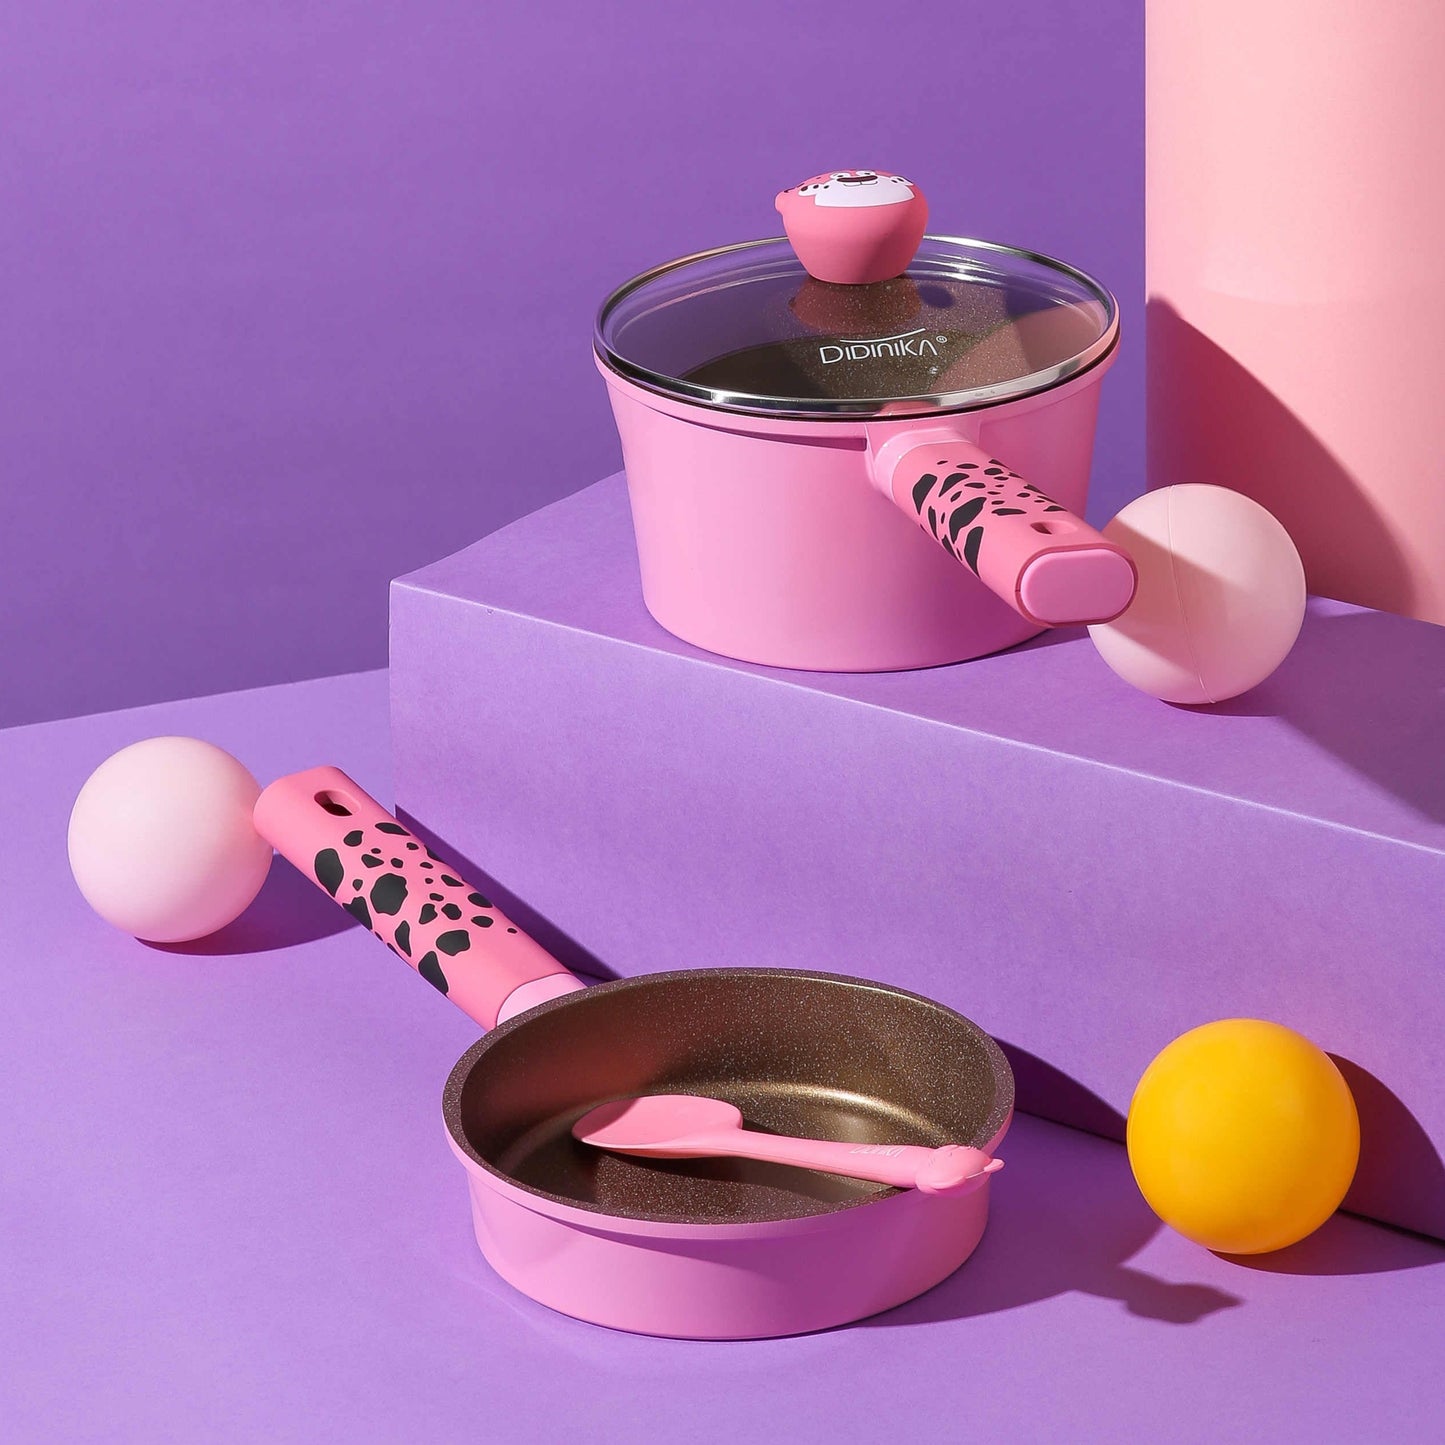 The Pink Panther Baby Cookware